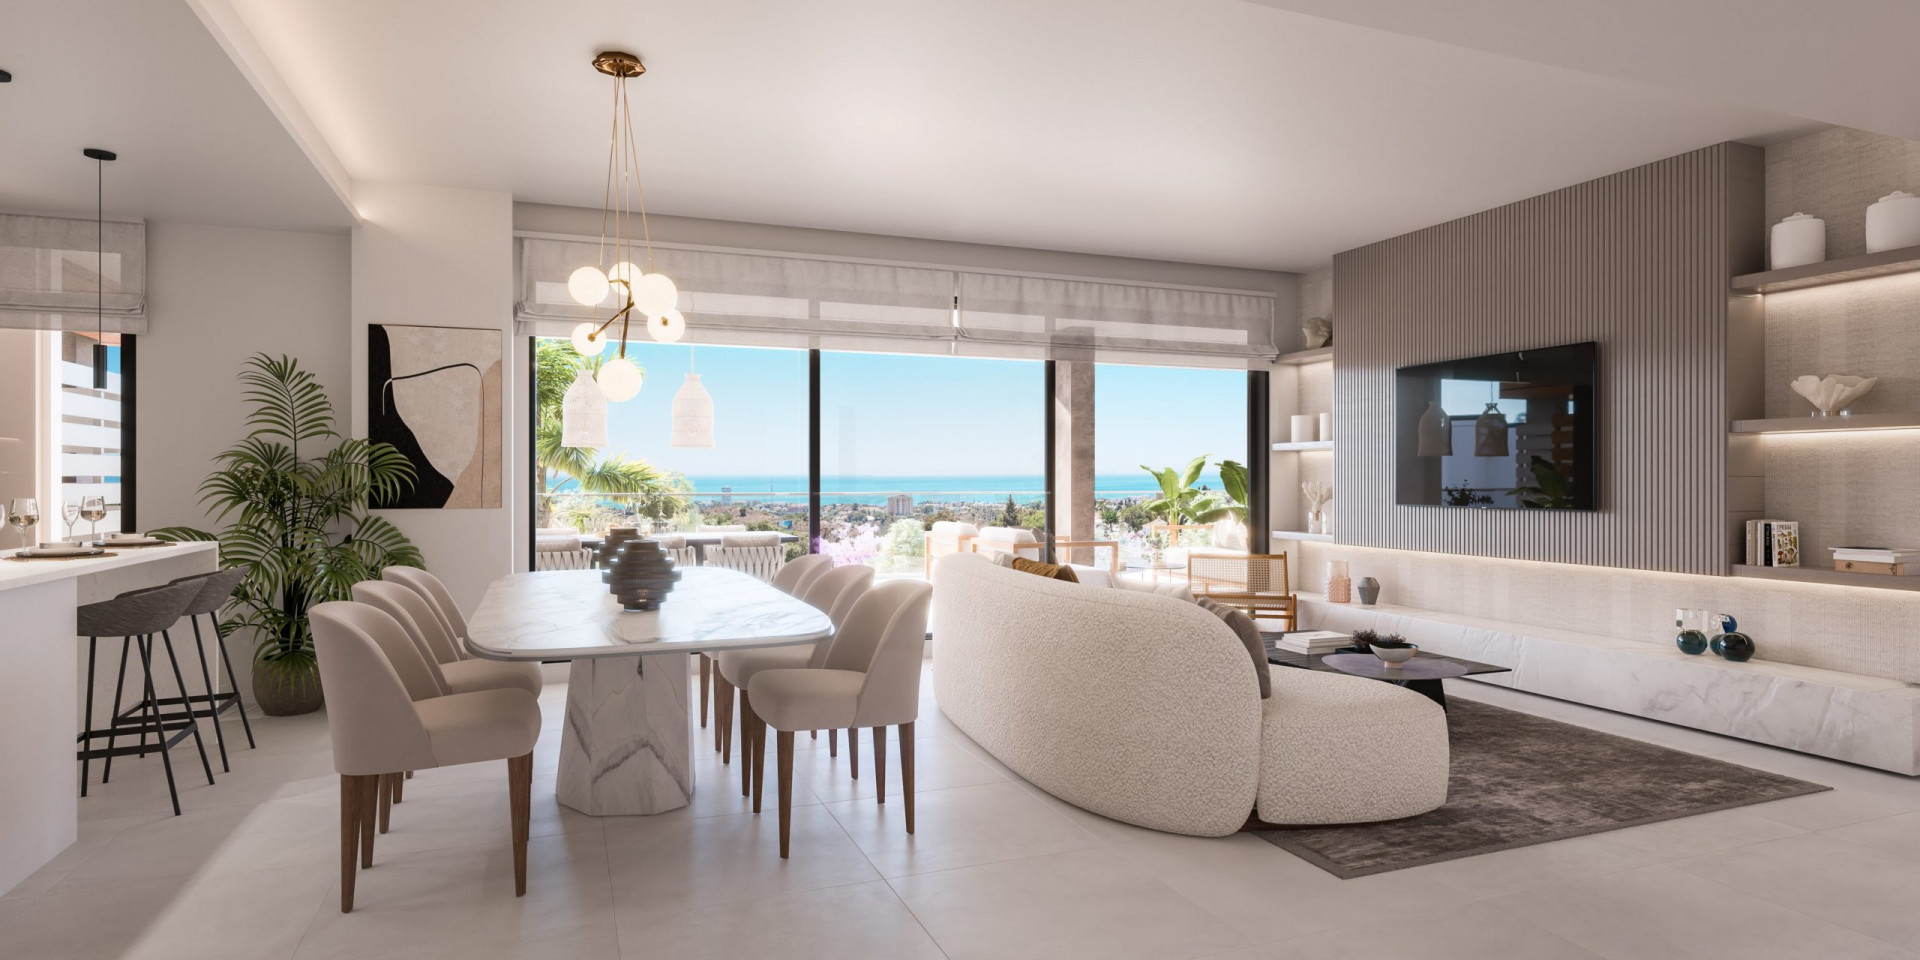 Spacious flat with garden and private pool located east of Marbella. | Image 7